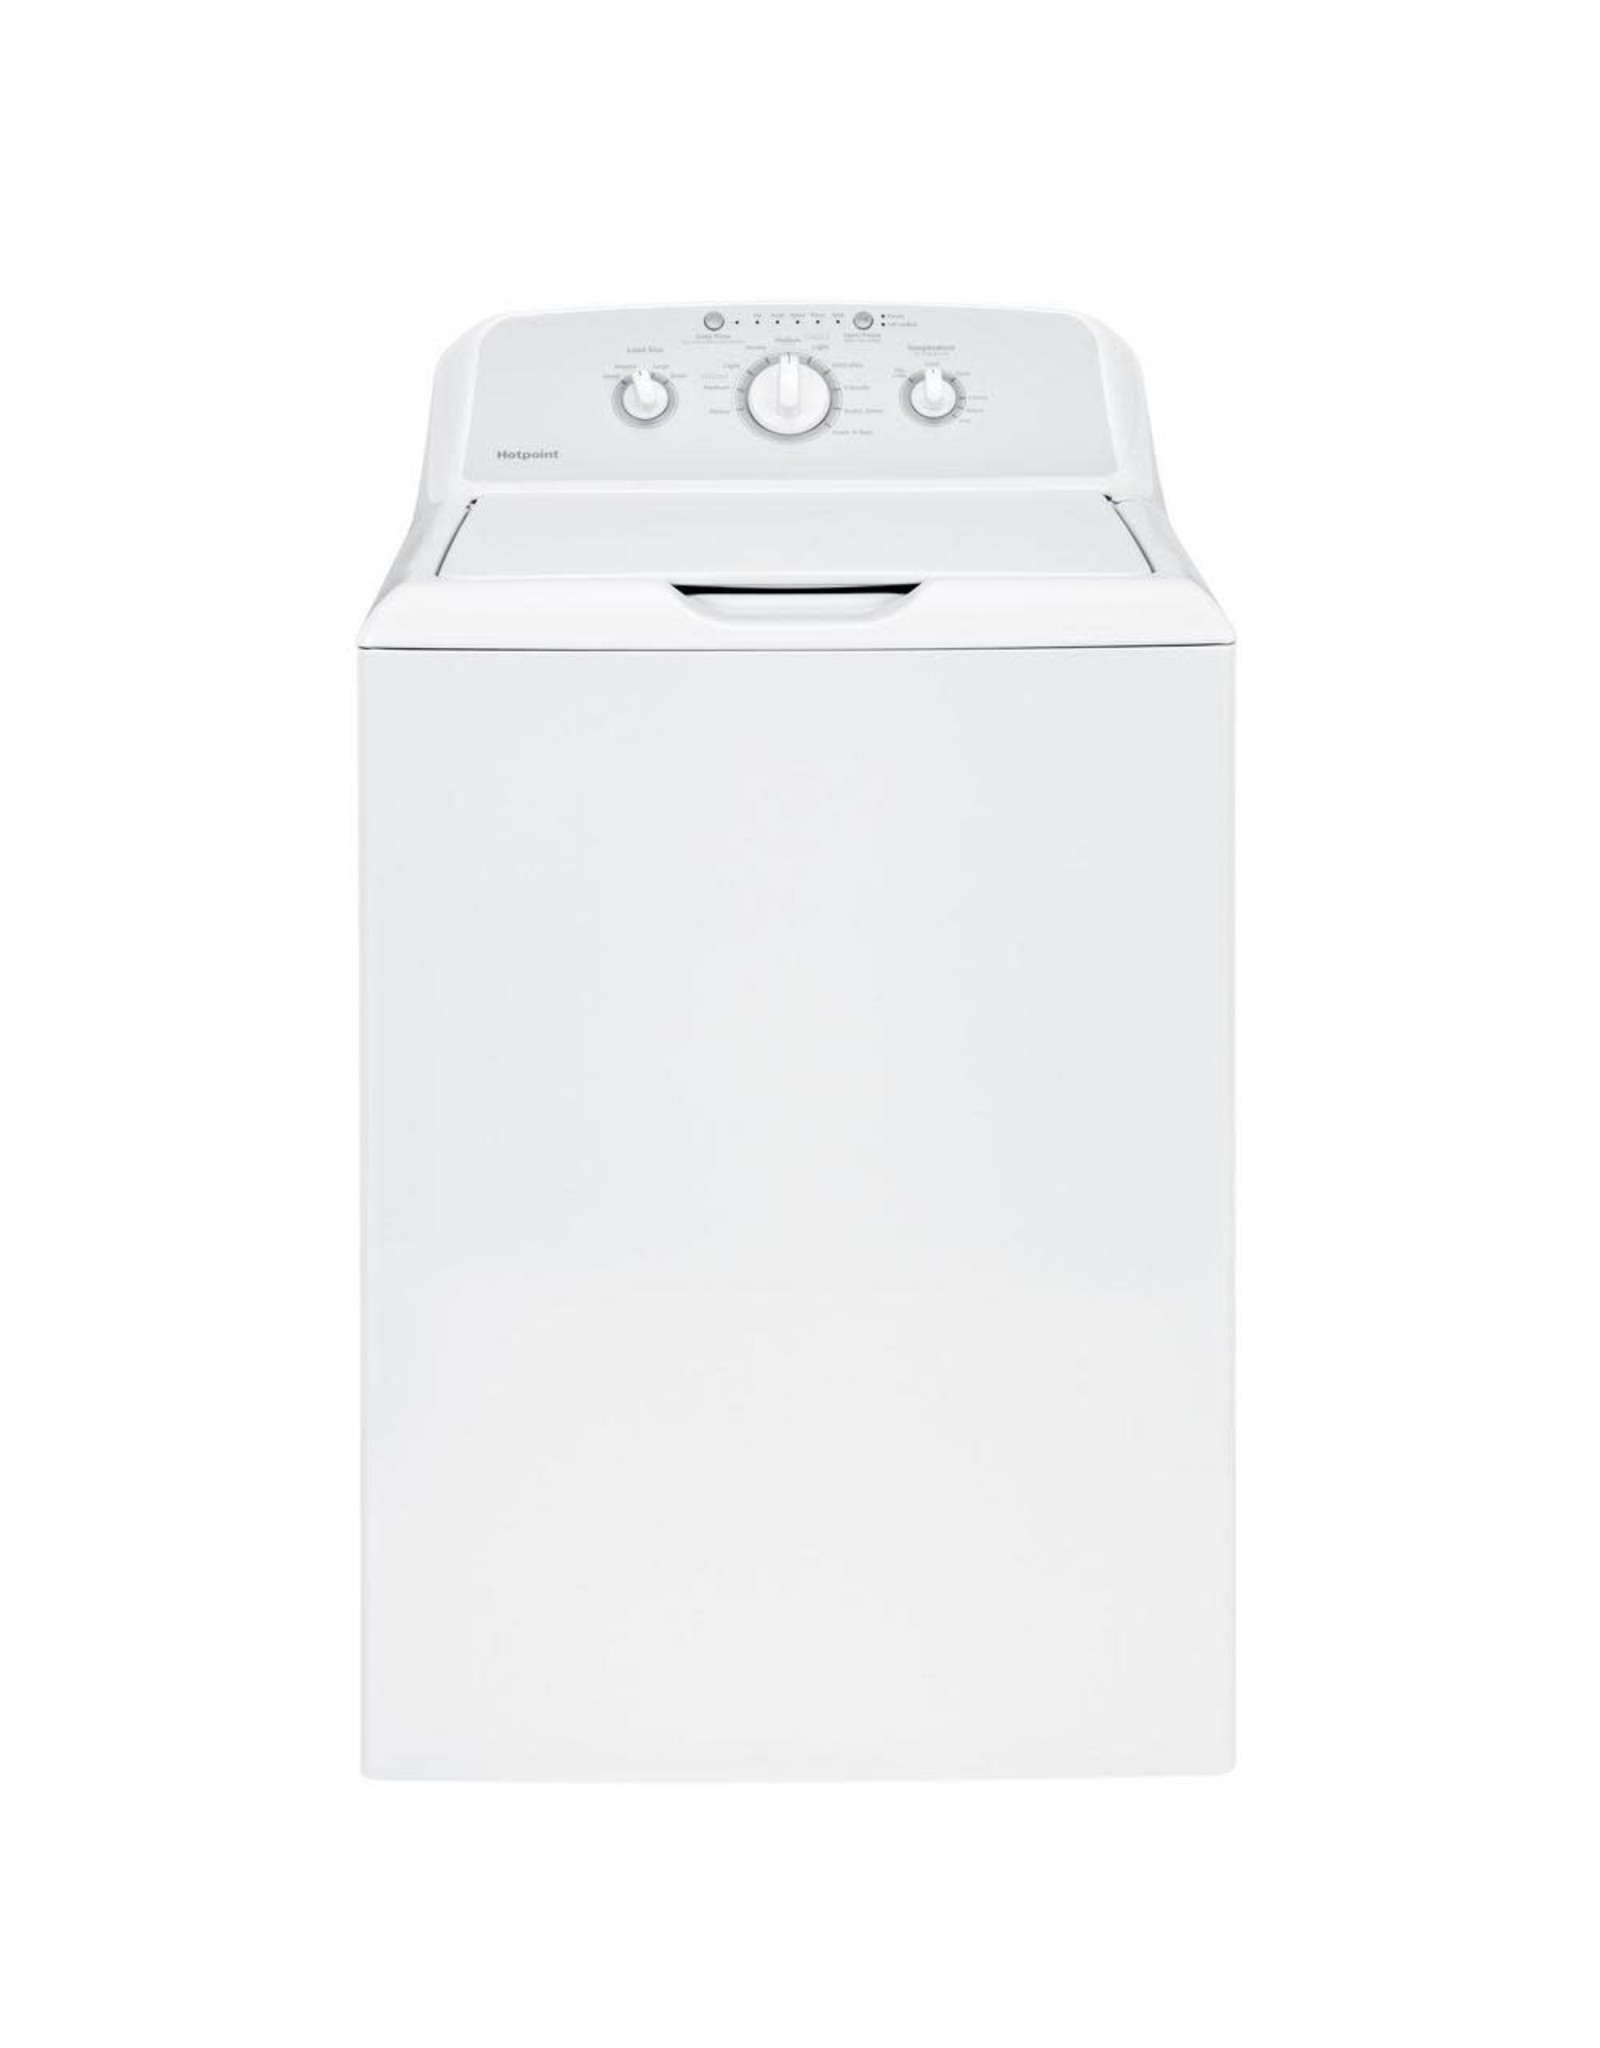 Whirlpool Hotpoint/Conservator 3.8 cu.ft Washer